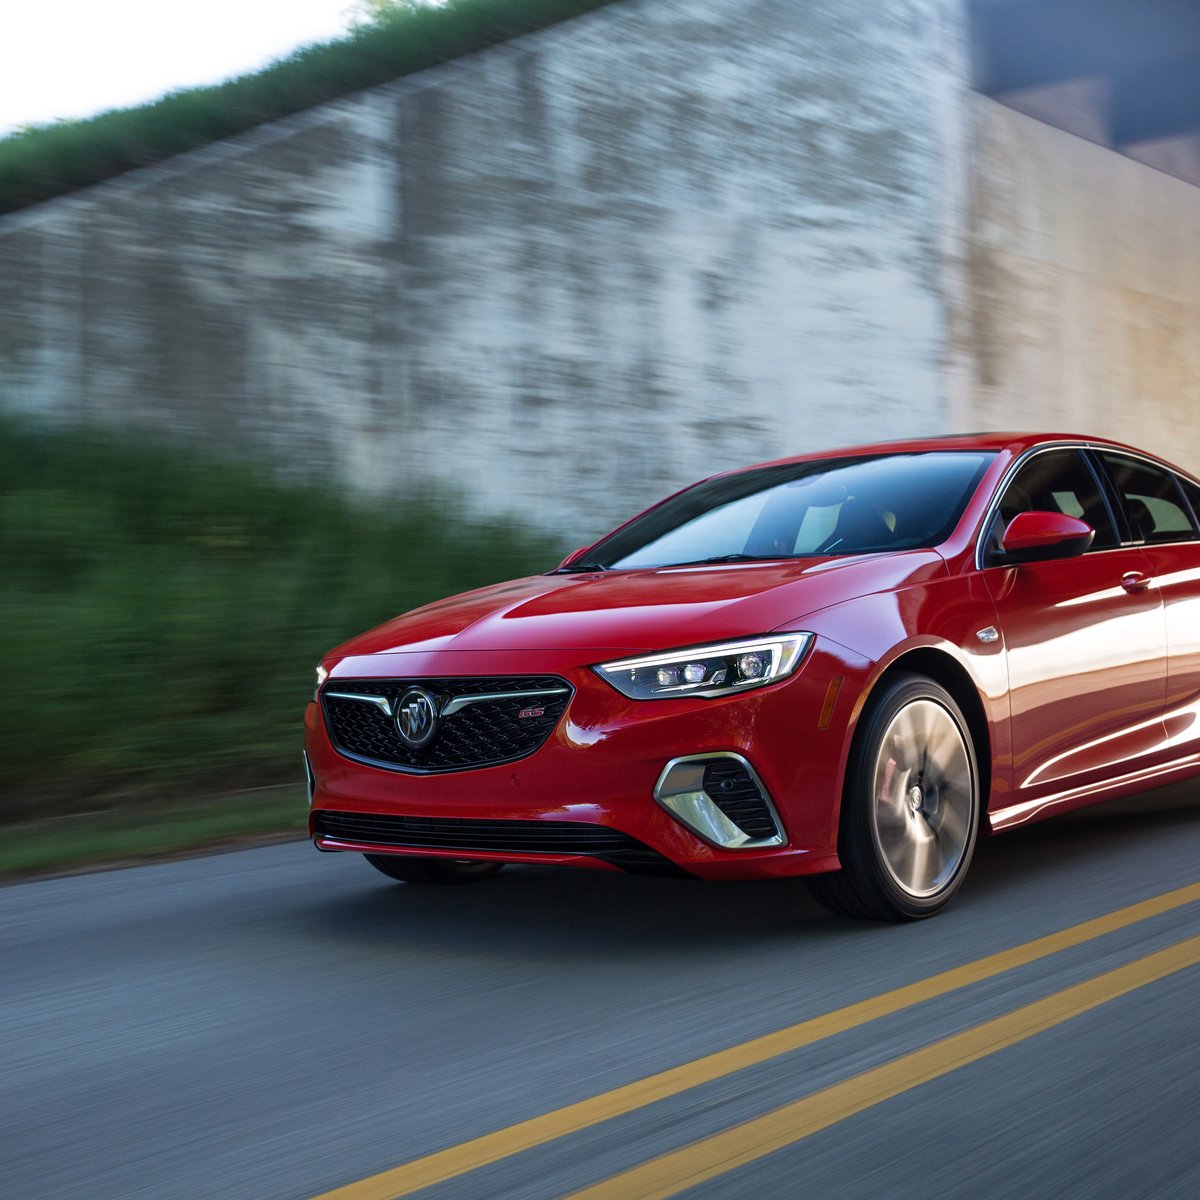 Automotive Minute: 2018 Buick Regal GS is this generation's Monte